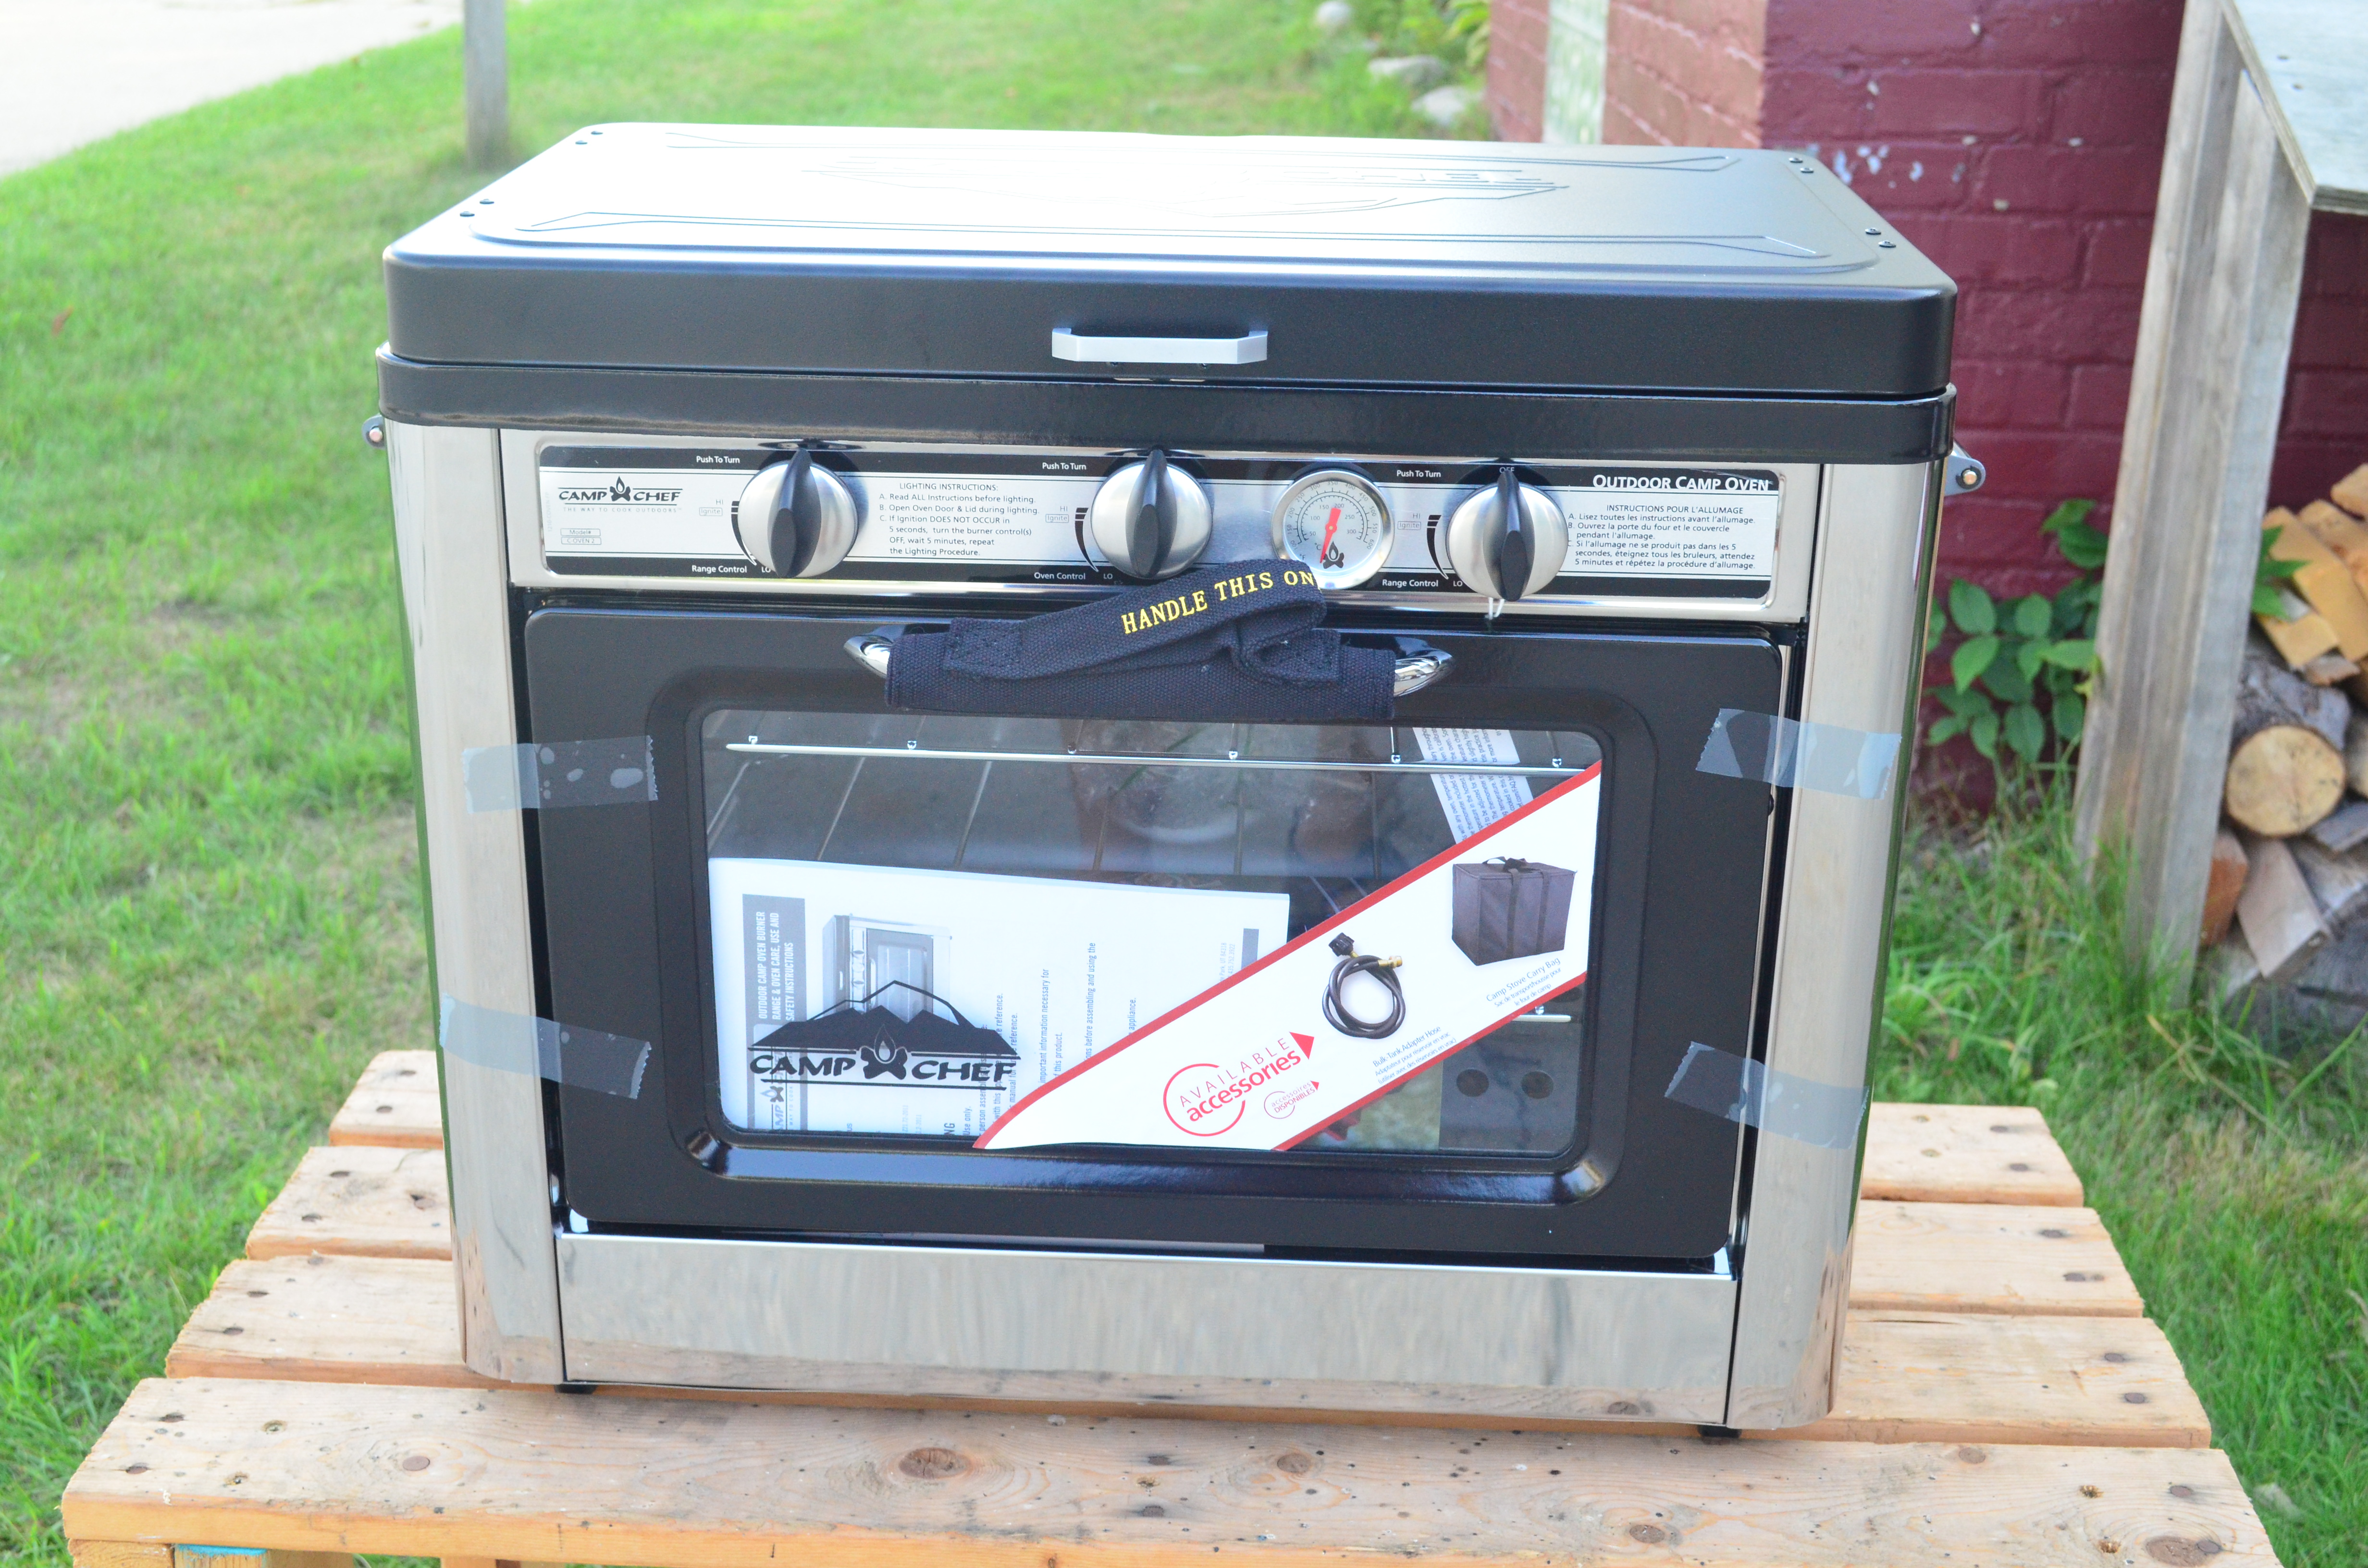 A Review Of The Camp Chef Oven Outdoor Gas Range - Backdoor Survival